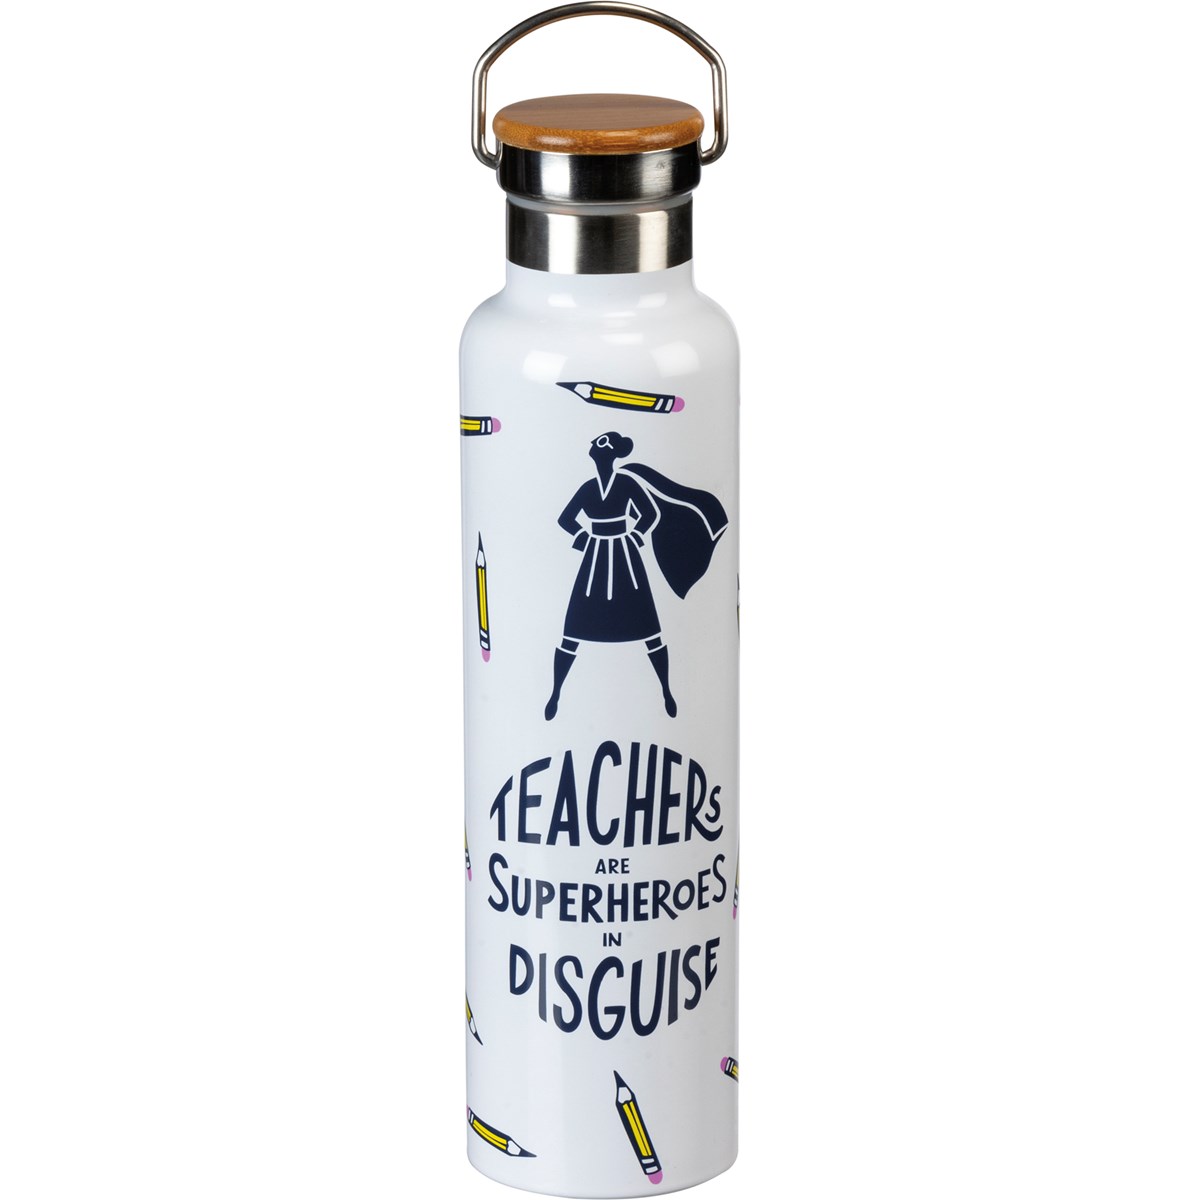 Insulated Bottle - Teachers Are Superheroes - 25 oz., 2.75" Diameter x 11.25" - Stainless Steel, Bamboo